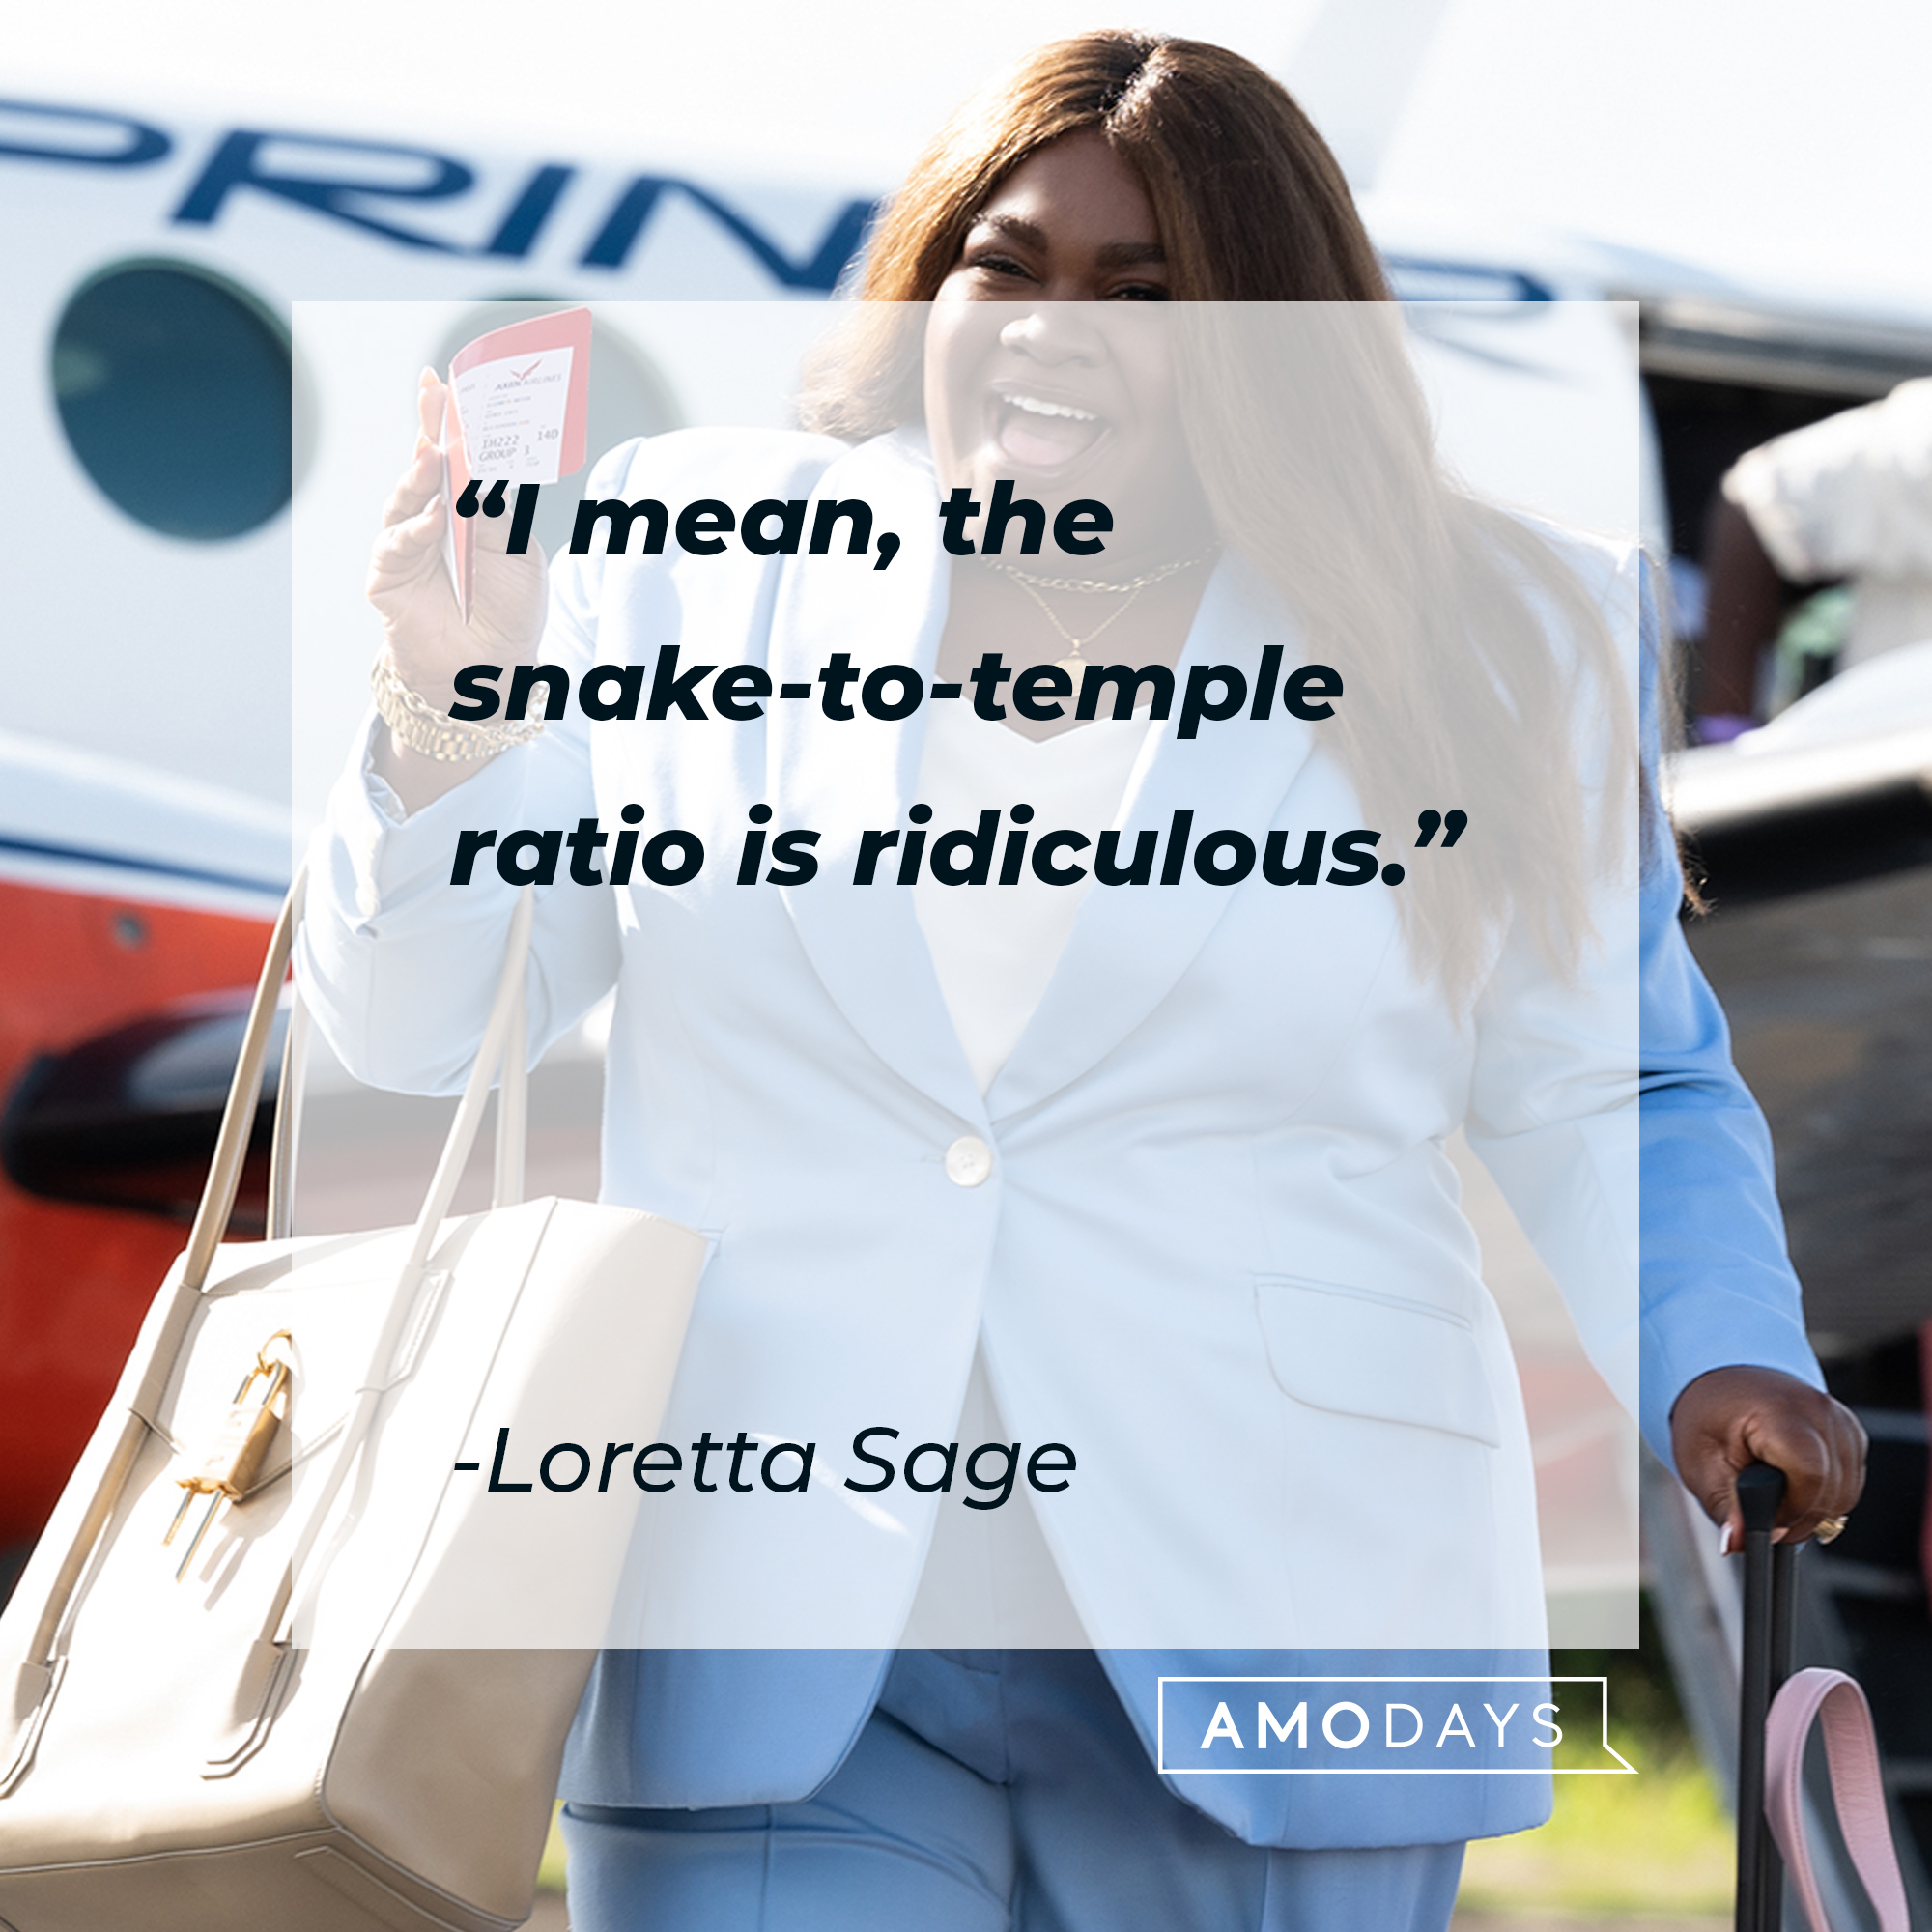 Loretta Sage with her quote: "I mean, the snake-to-temple ratio is ridiculous." | Source: facebook.com/TheLostCityMovie